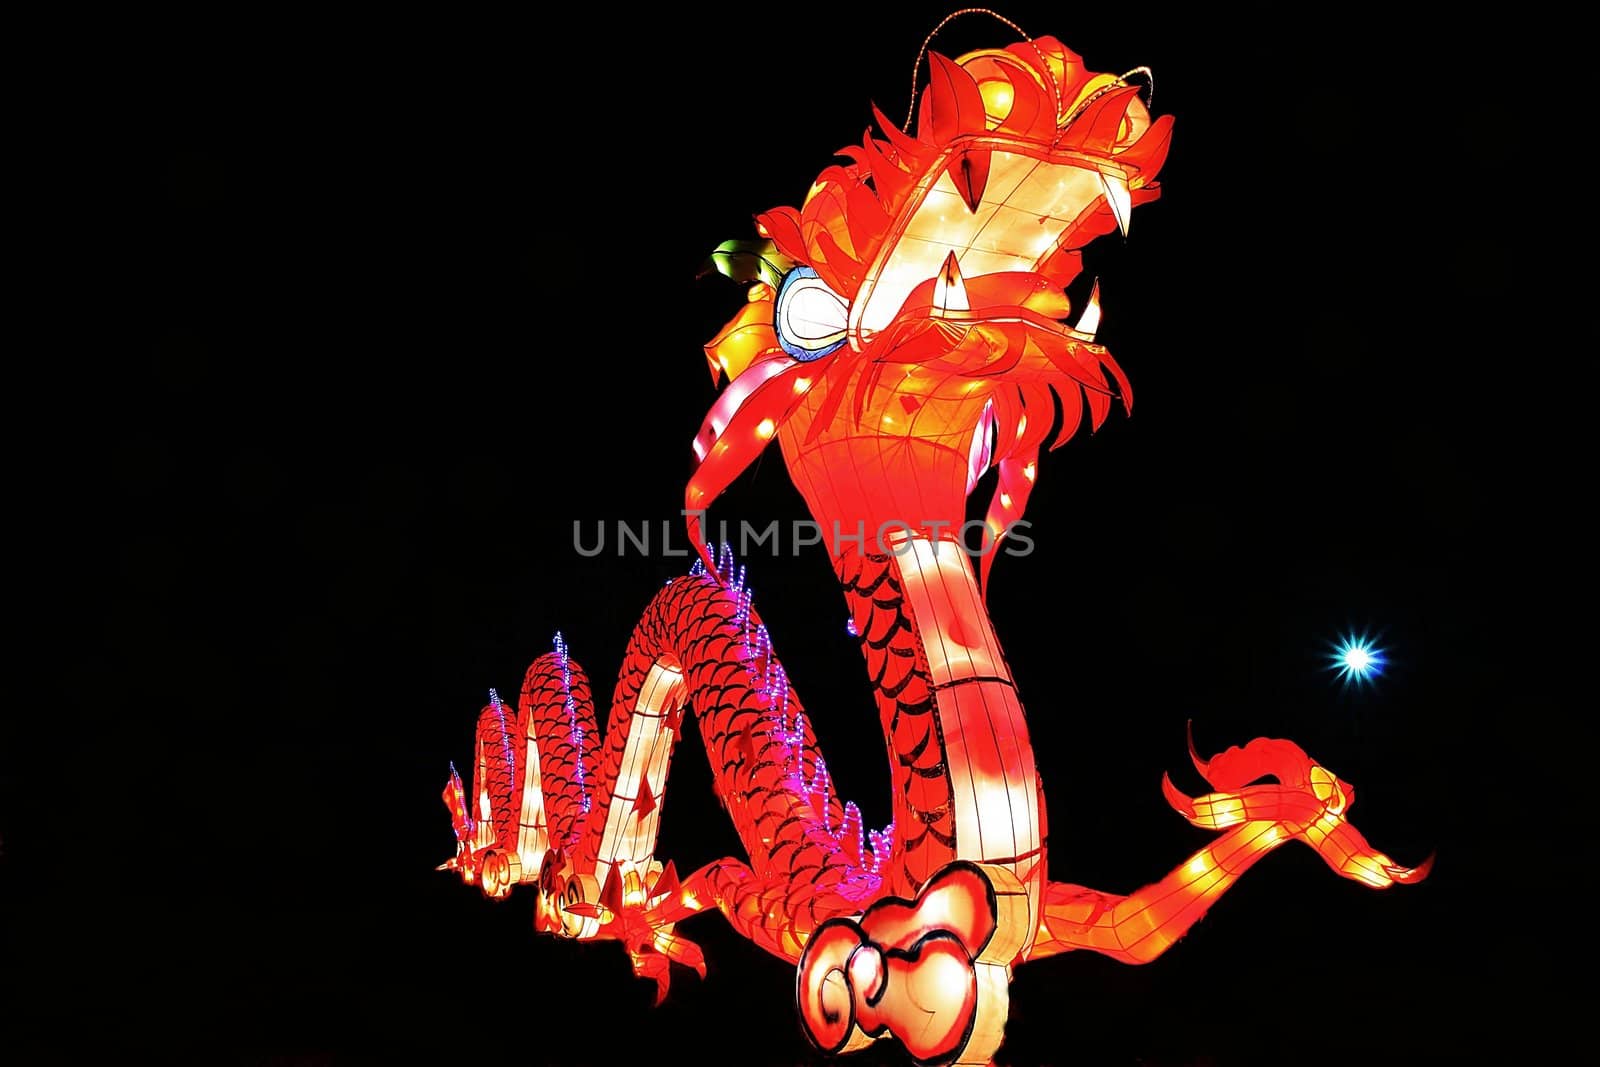 dragon lantern with the Fire ball.